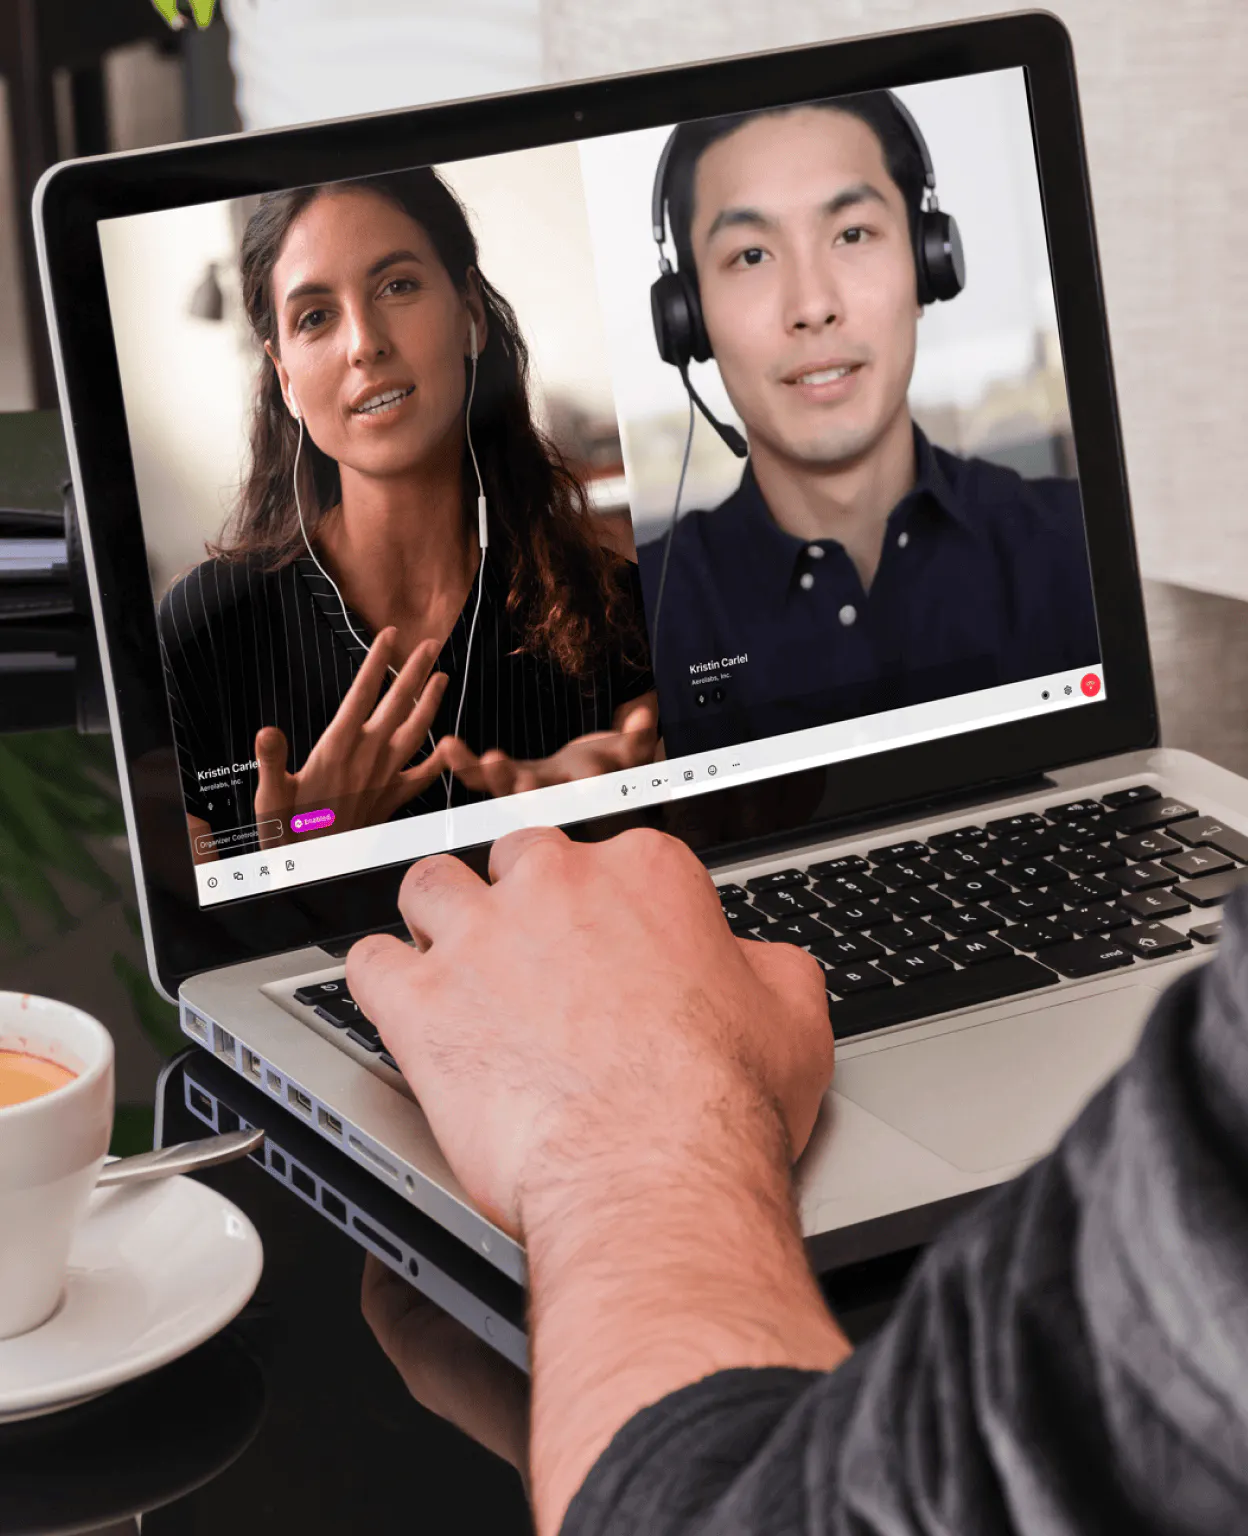 A person in a video conference call with two other people